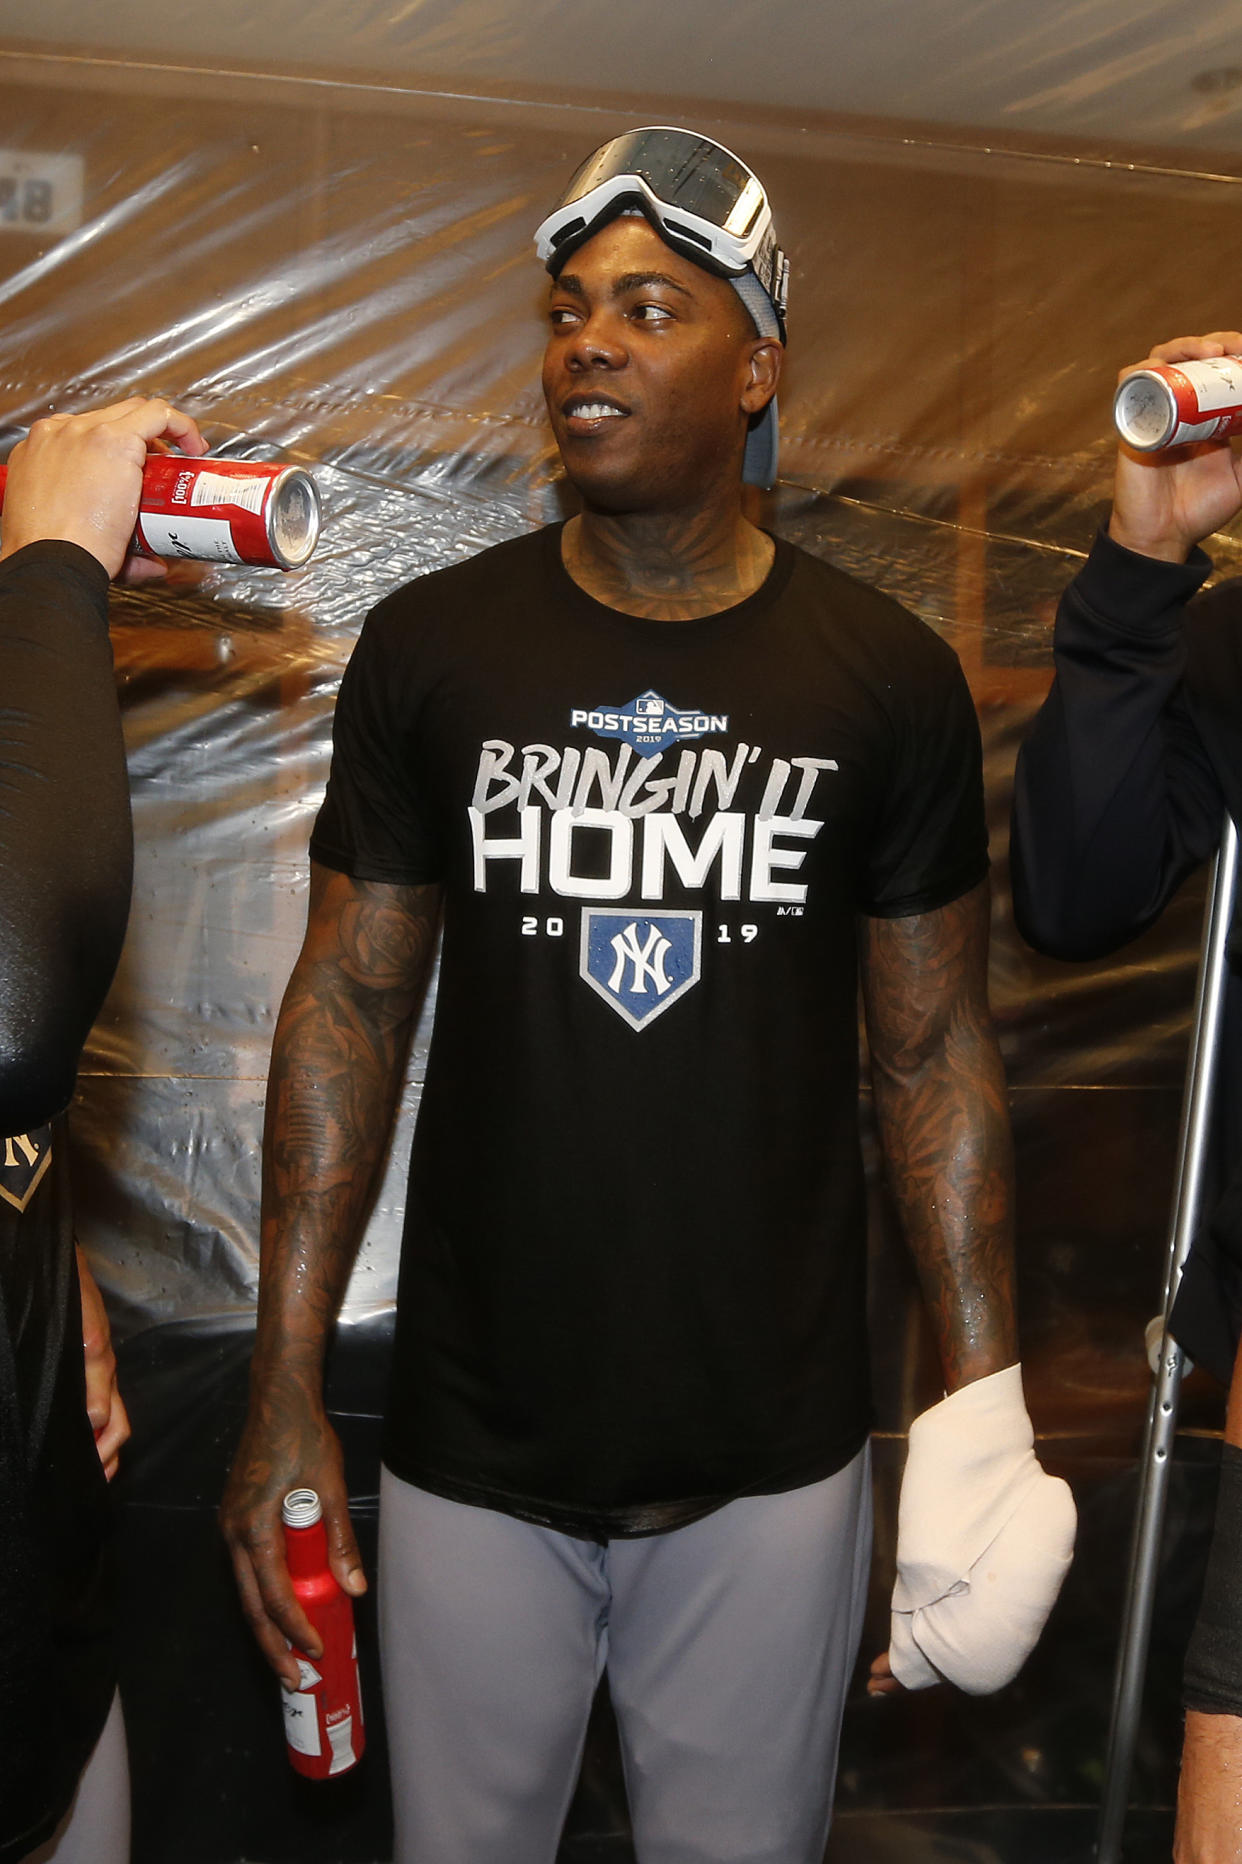 Aroldis Chapman's pitching hand was in a heavy wrap after he says he was hit with a bottle in the clubhouse. (Getty)